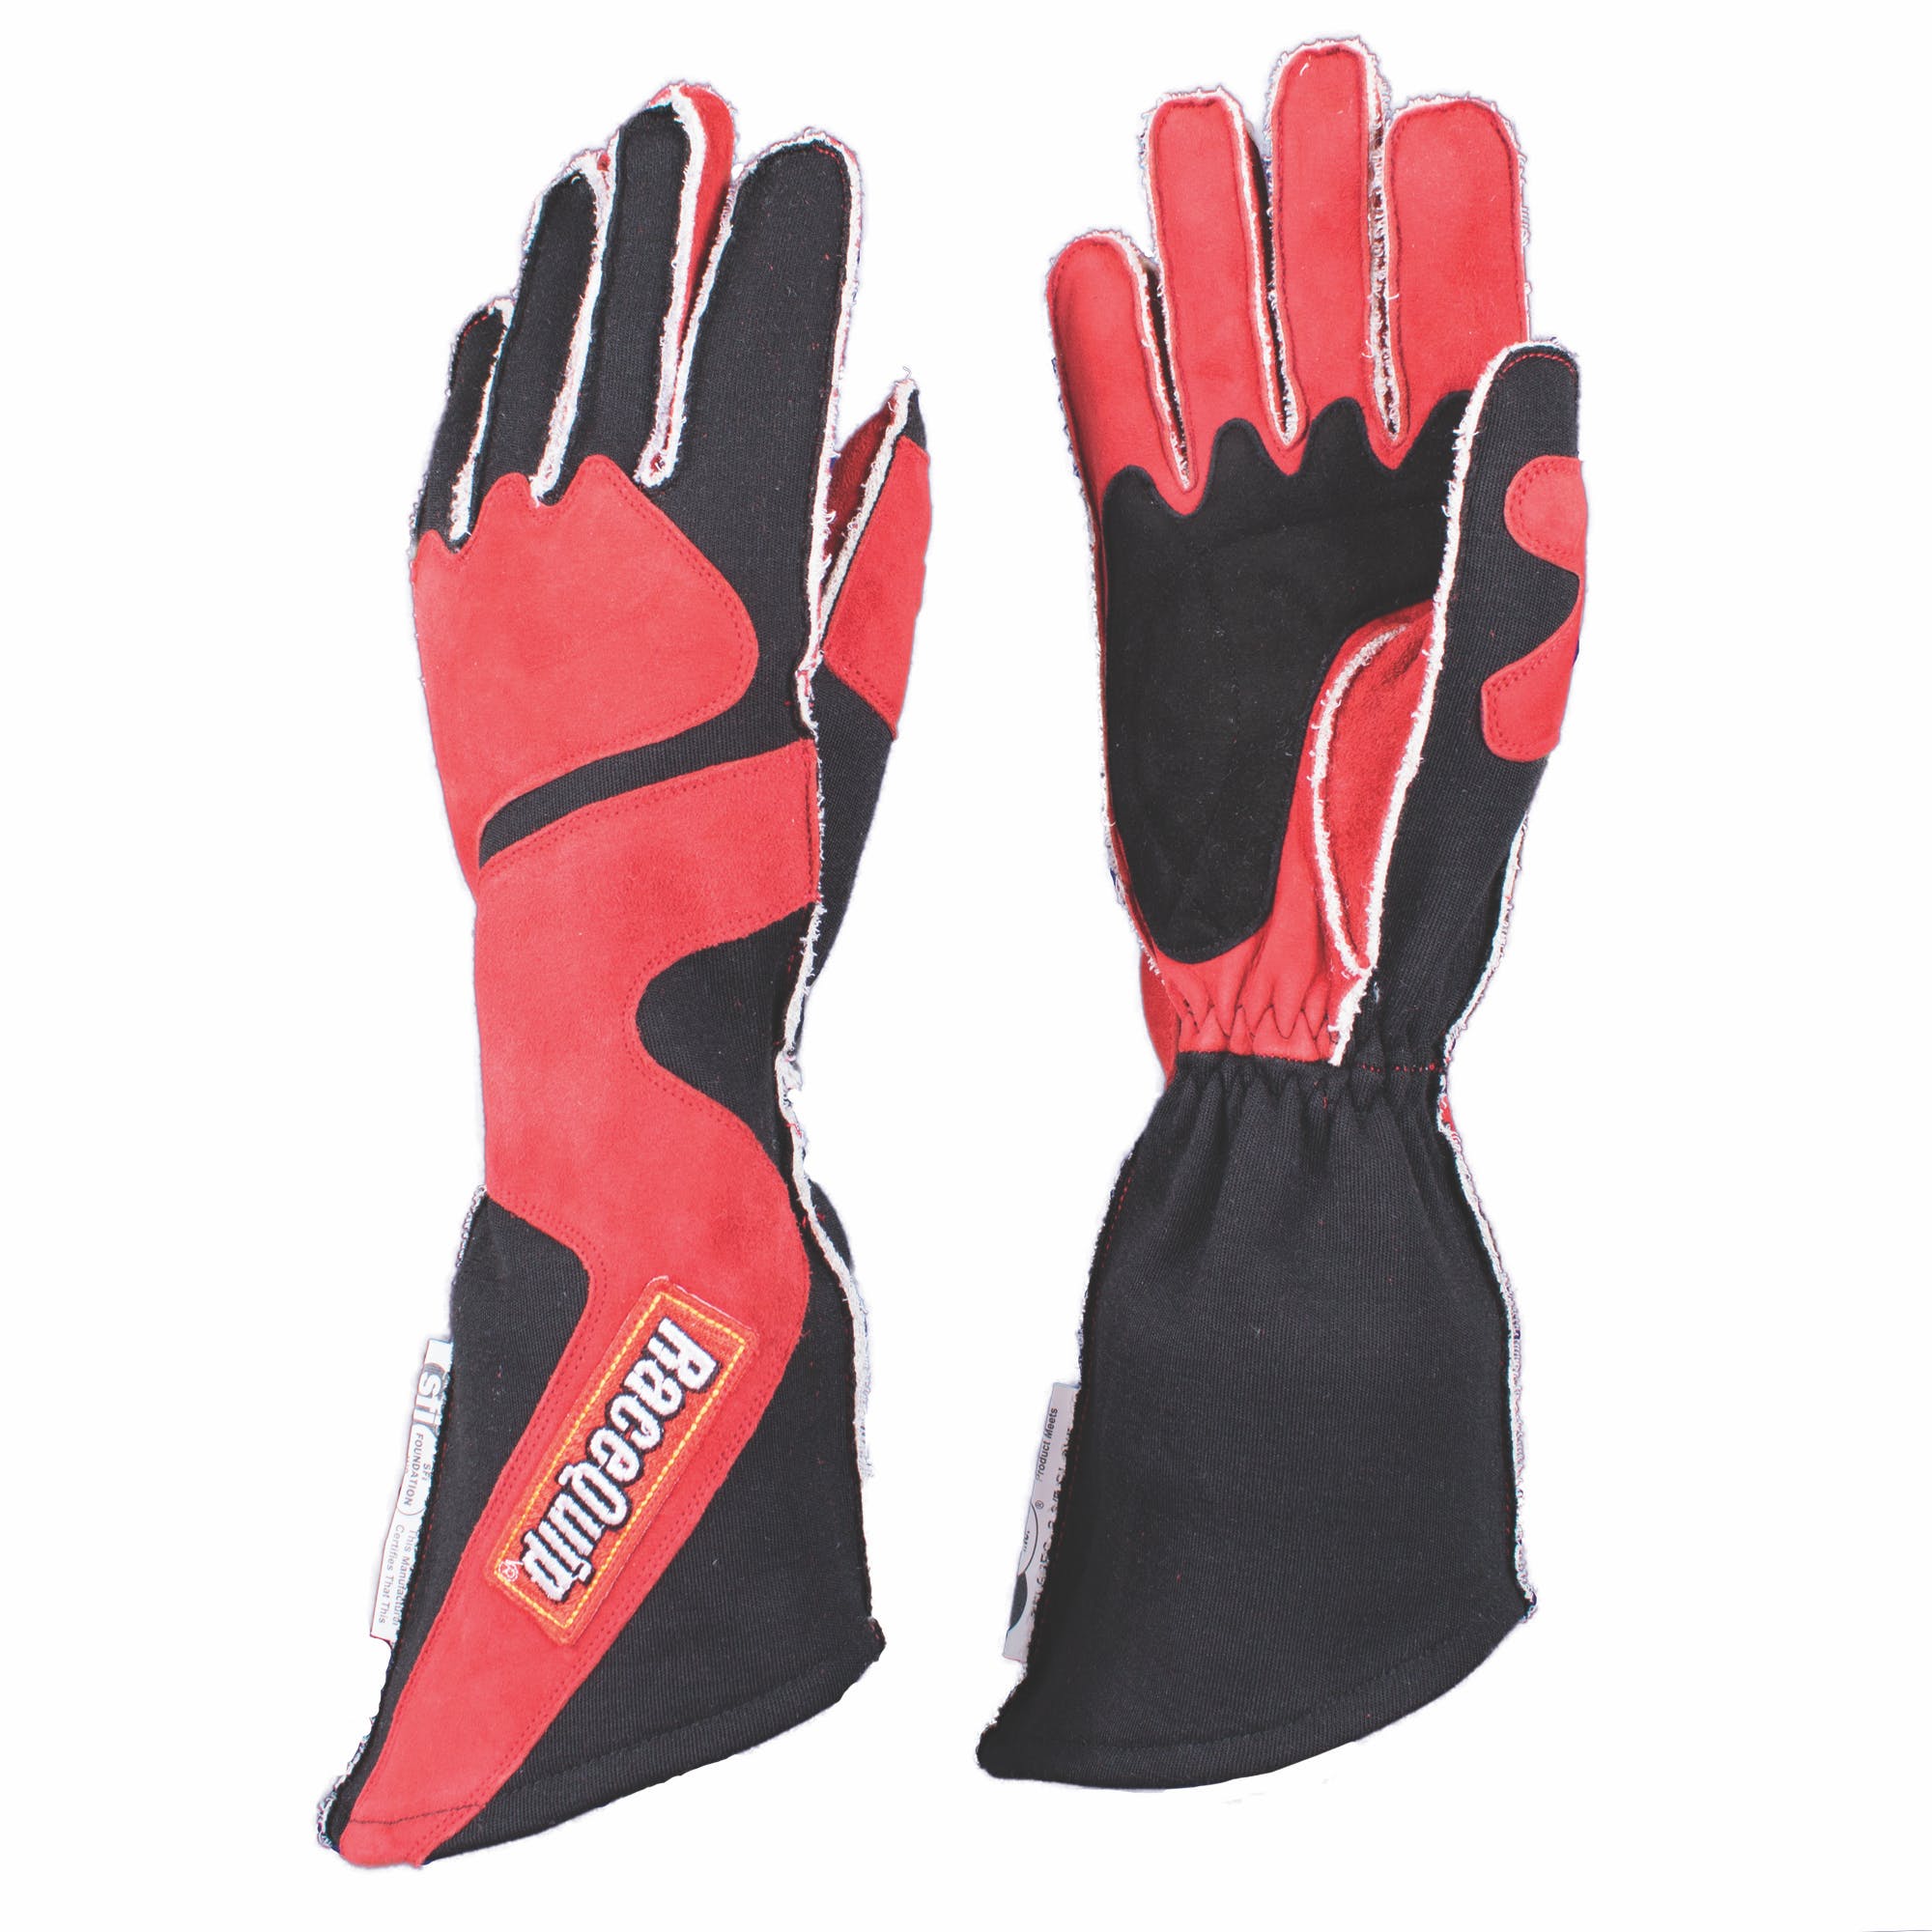 RaceQuip 359103 SFI-5 Out Seam Angle-Cut Gauntlet Racing Gloves (Red/Black, Medium)